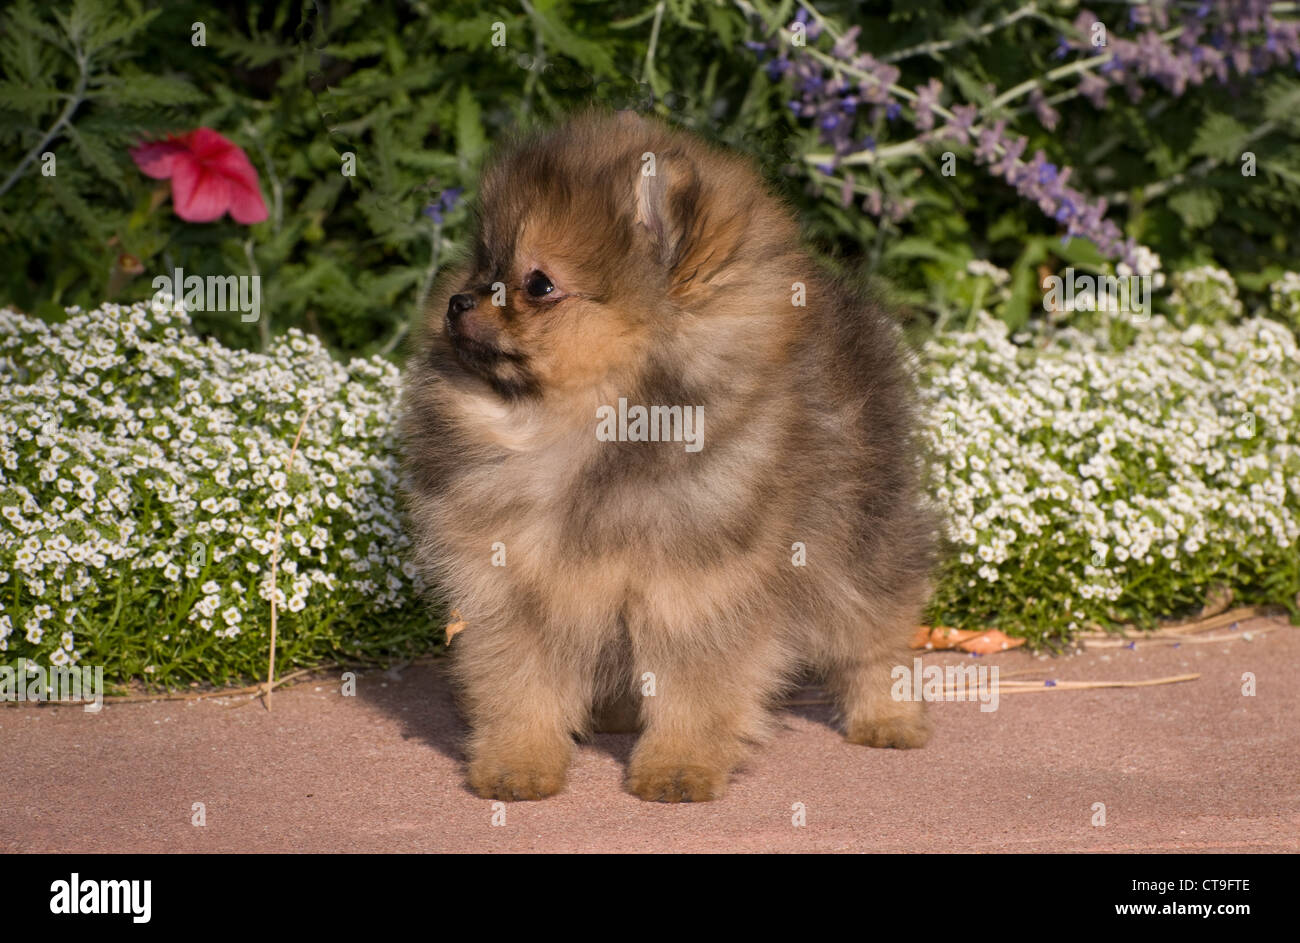 Pomeranian puppy standing in front of flowers Stock Photo